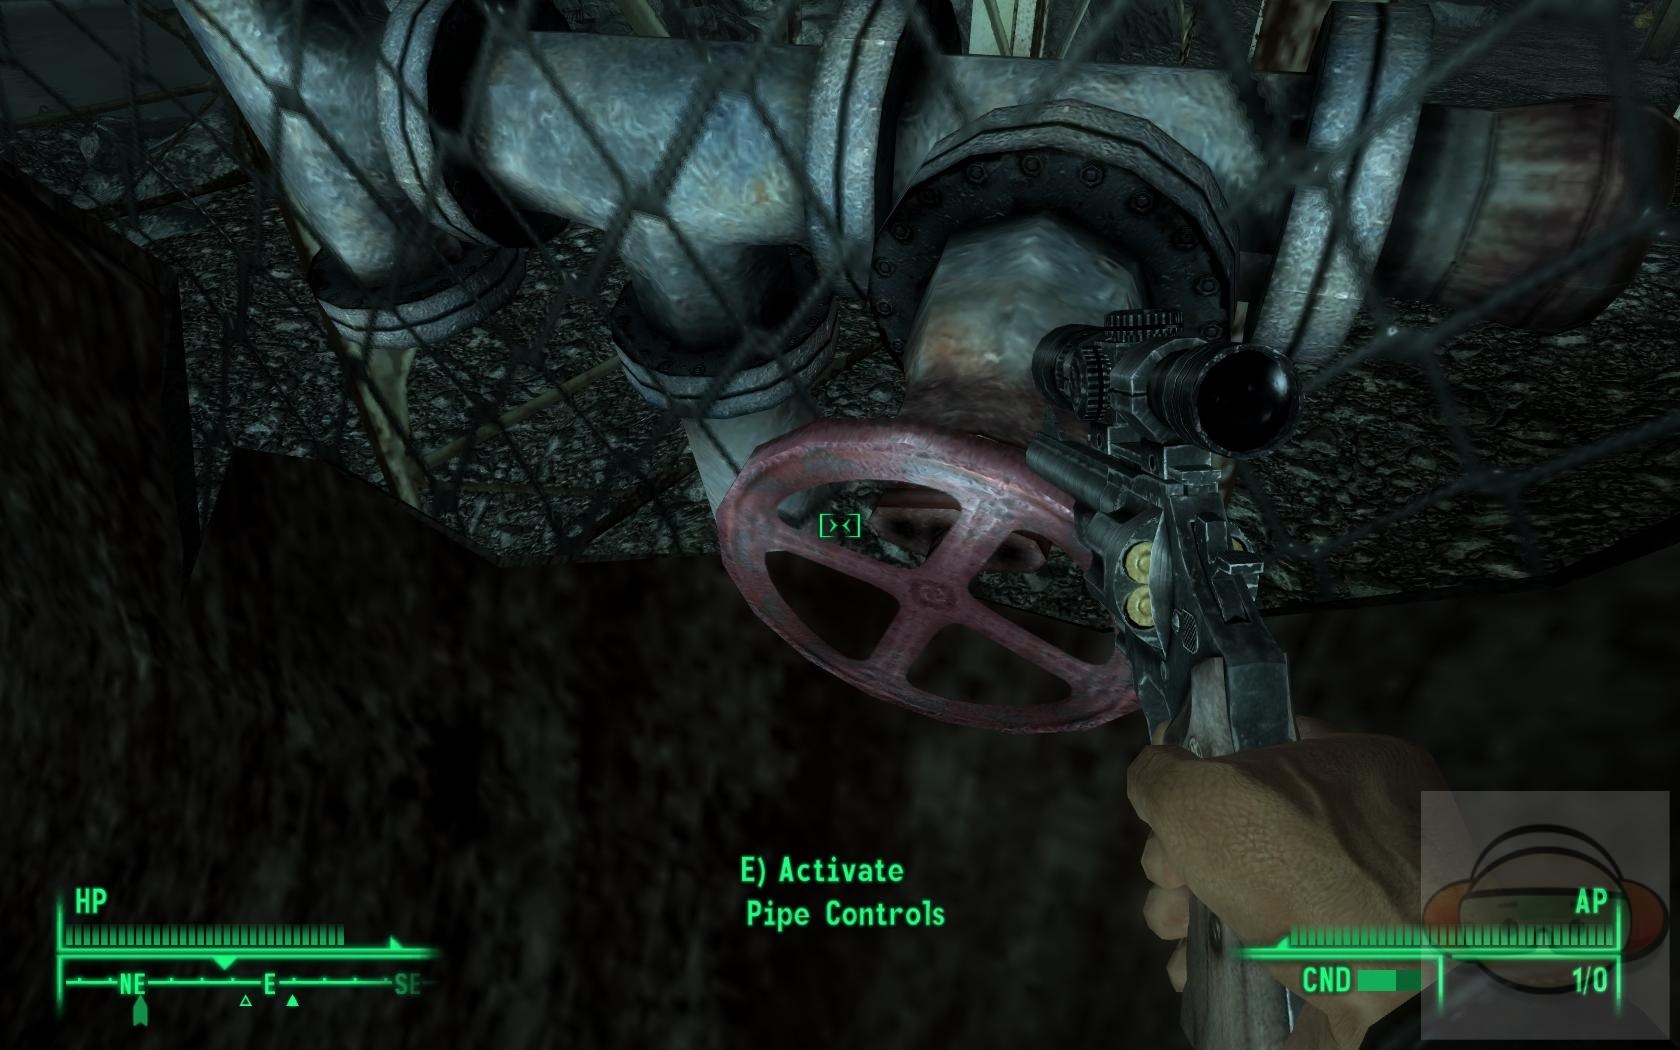 how to get fallout 3 for free pc